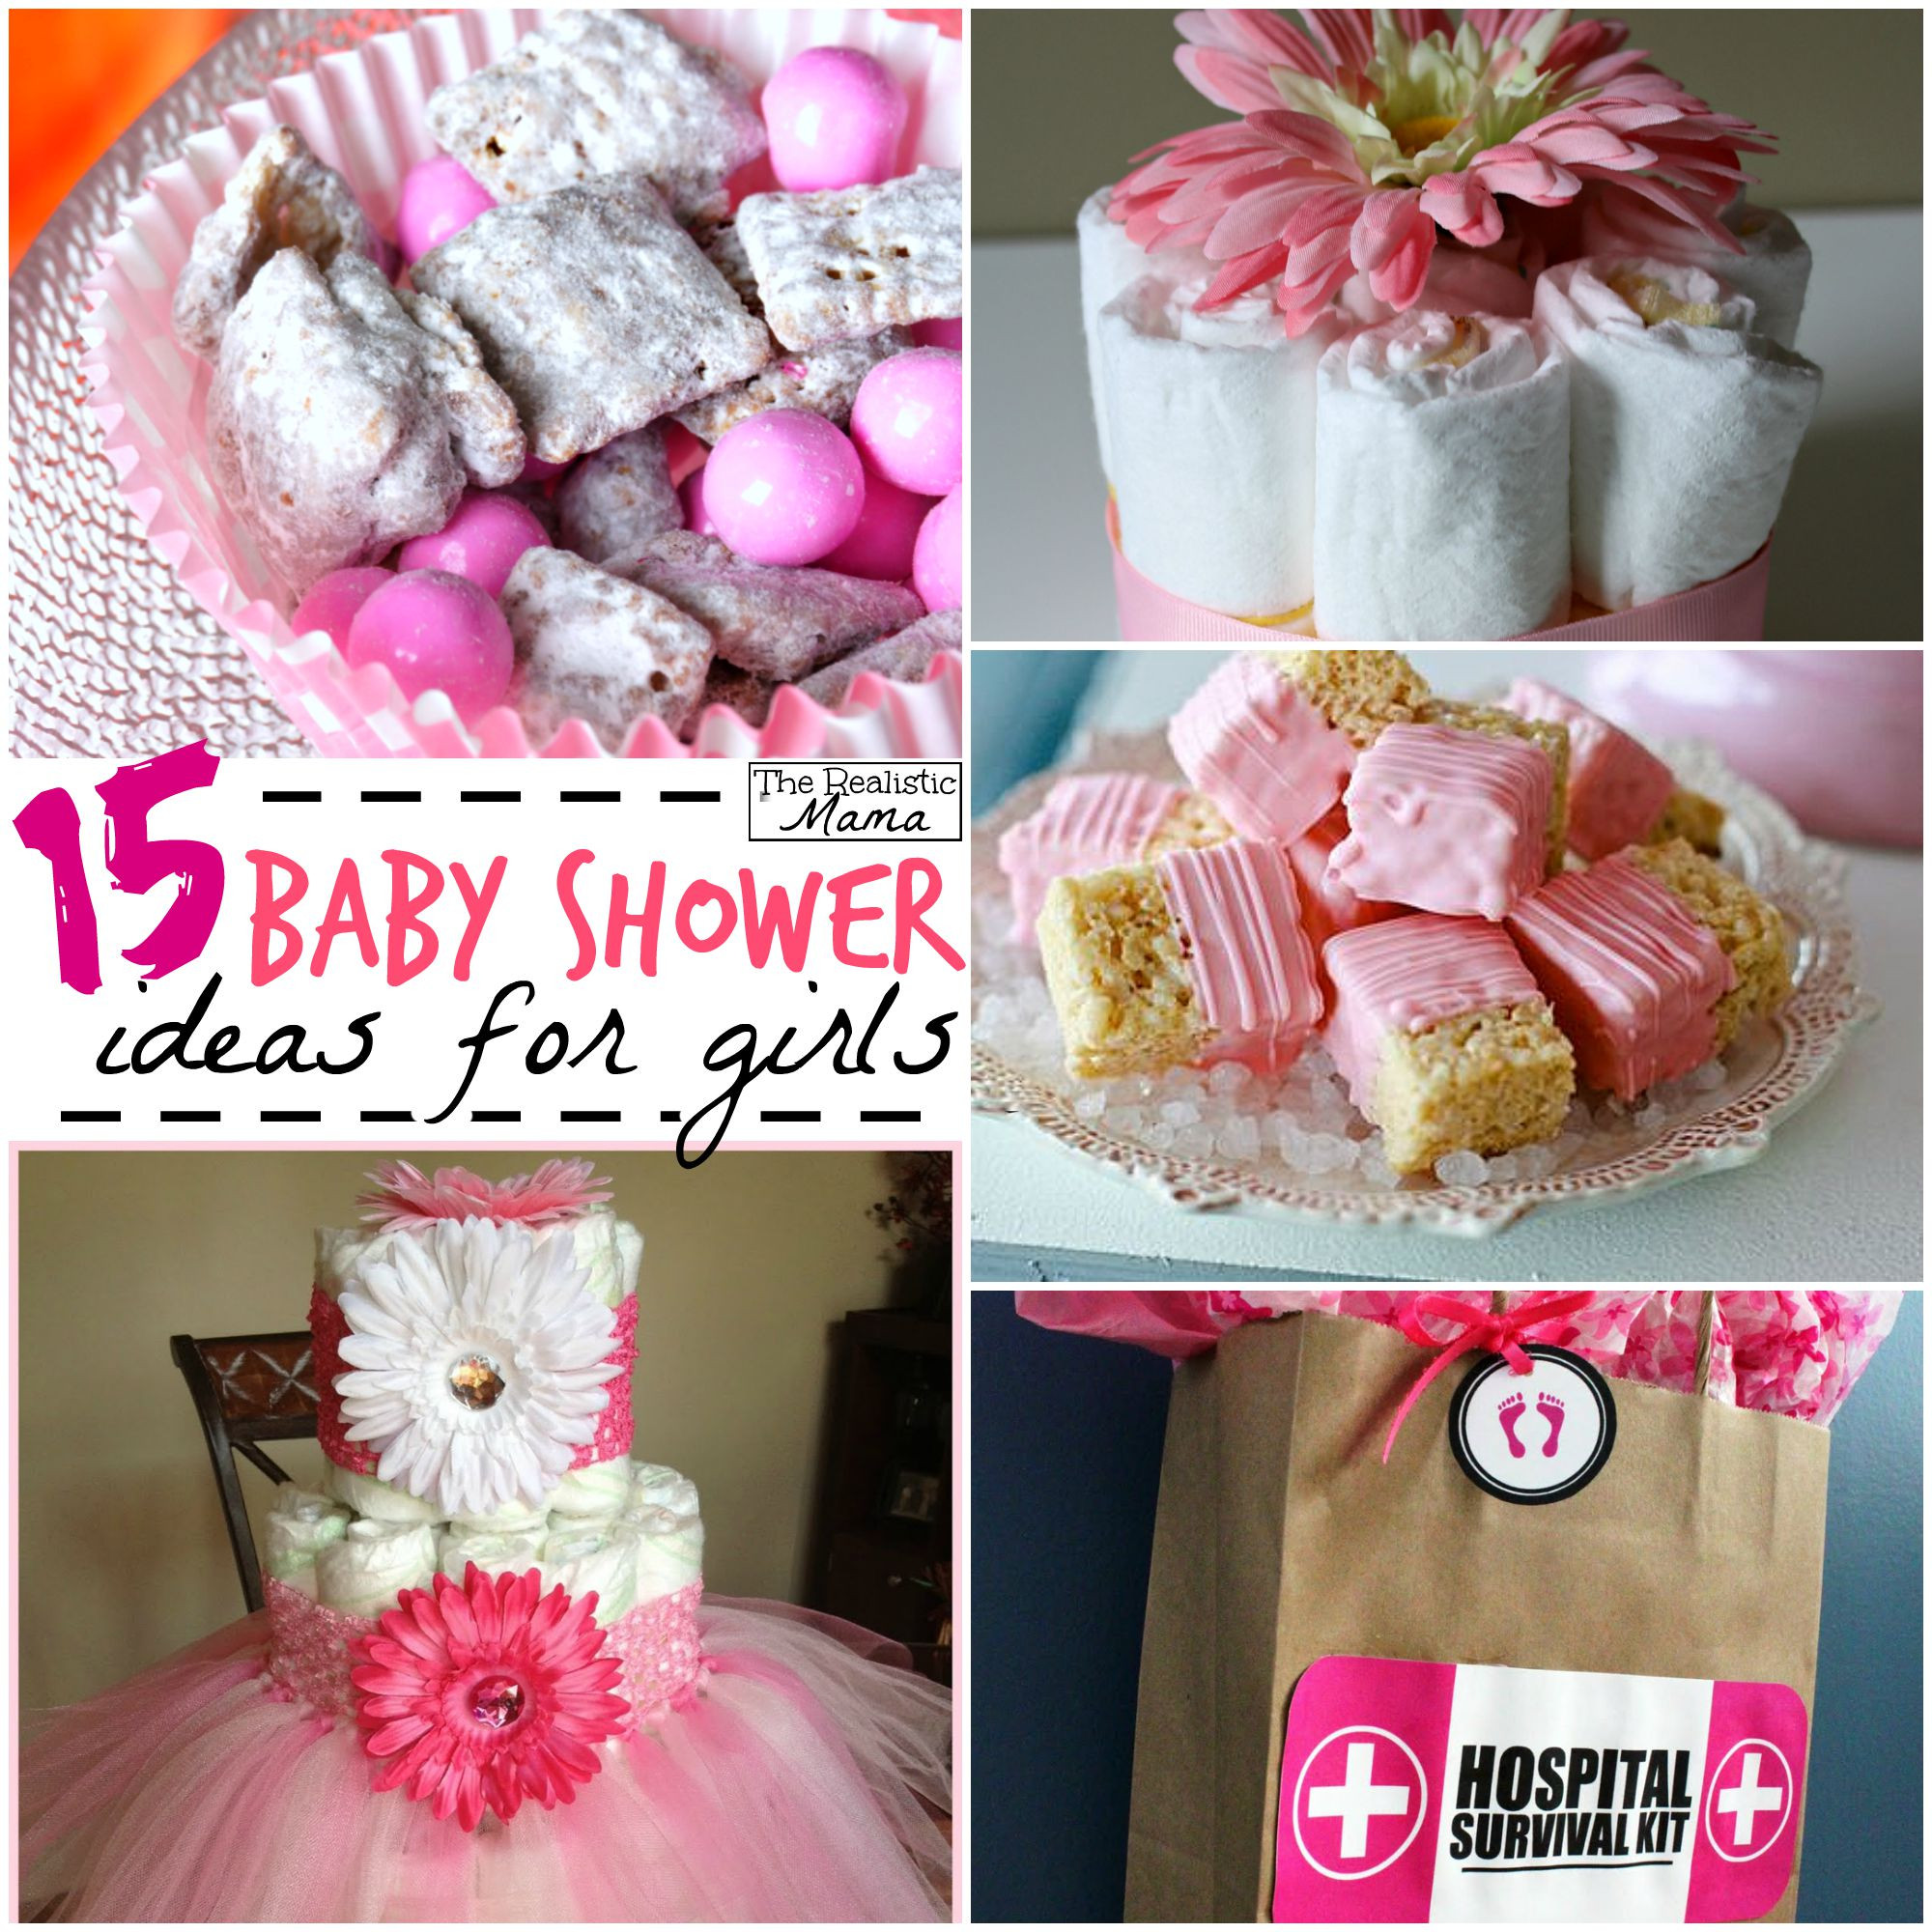 Baby Shower Ideas For A Girl Decorations
 15 Baby Shower Ideas for Girls The Realistic Mama